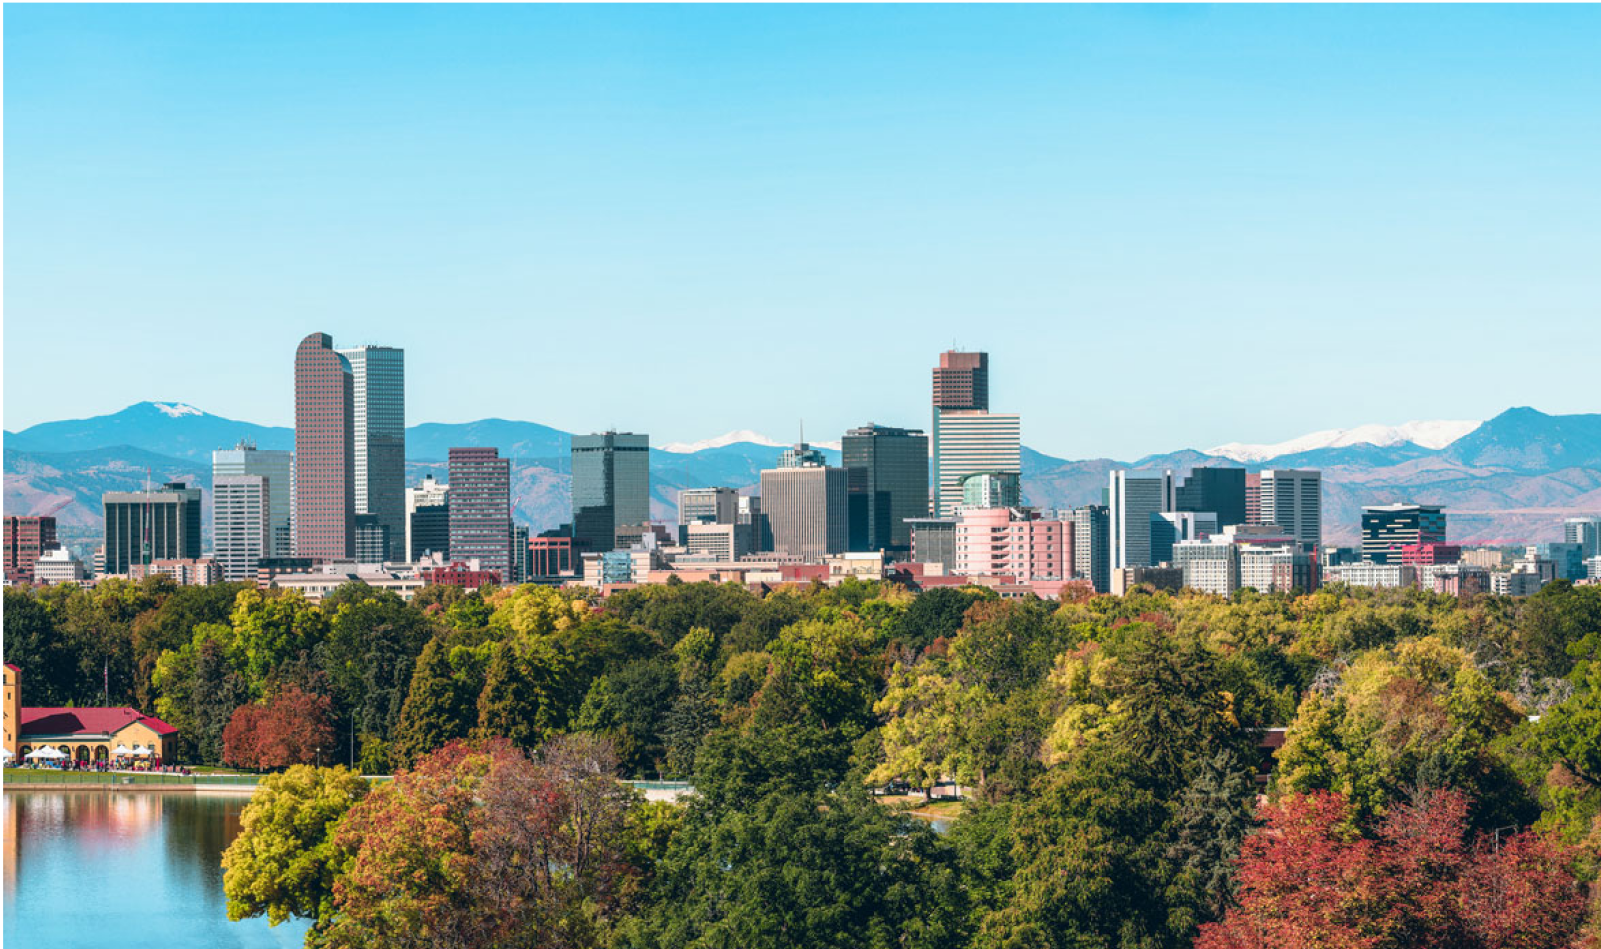 The city of Denver surrounded by picturesque mountains and colorful trees.